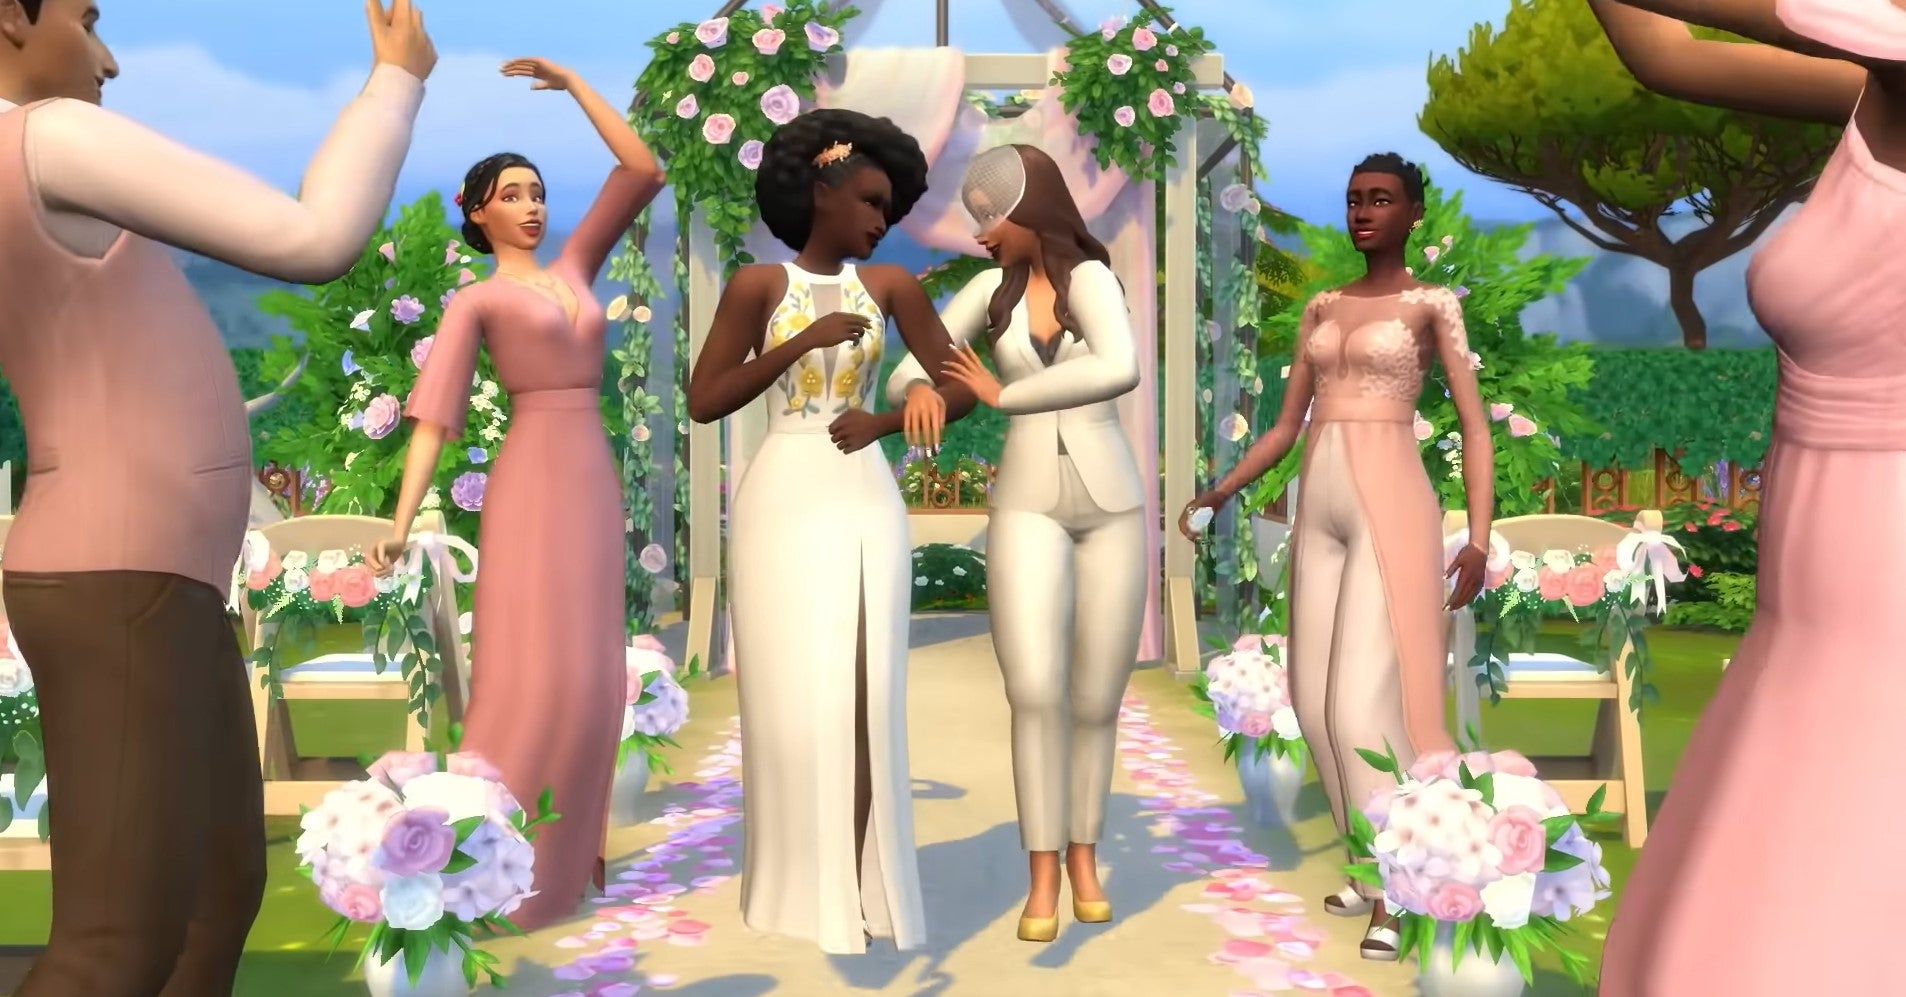 Image for EA will not sell The Sims 4 wedding pack in Russia due to laws against same-sex marriage